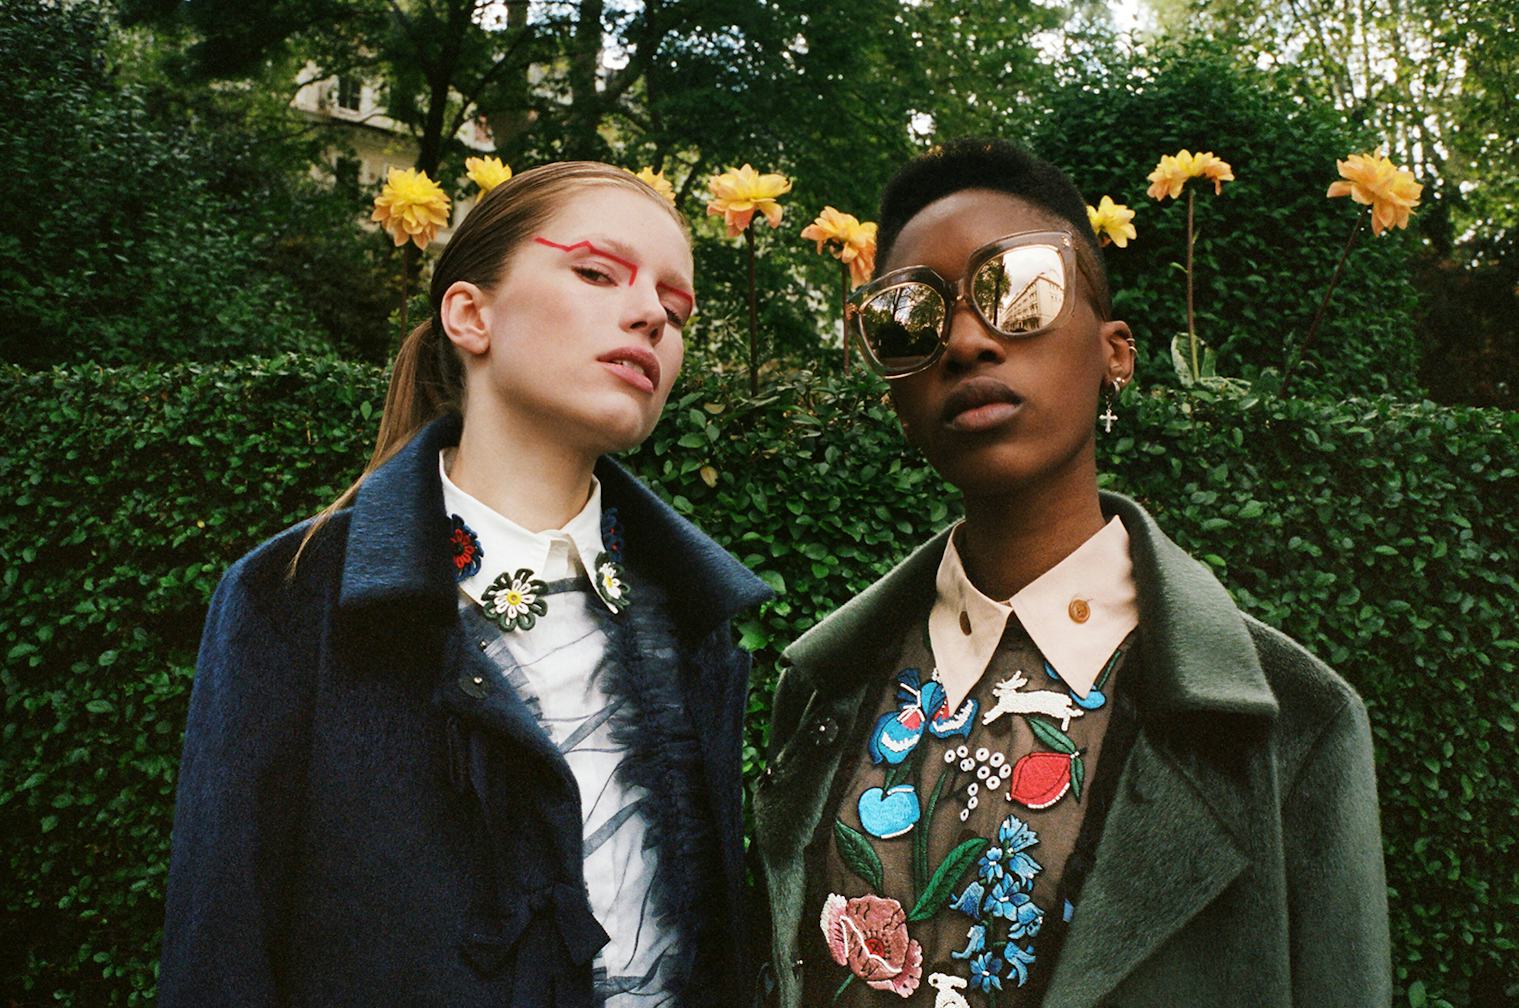 It’s Decided: This Fall, We’ll Wear Flowers